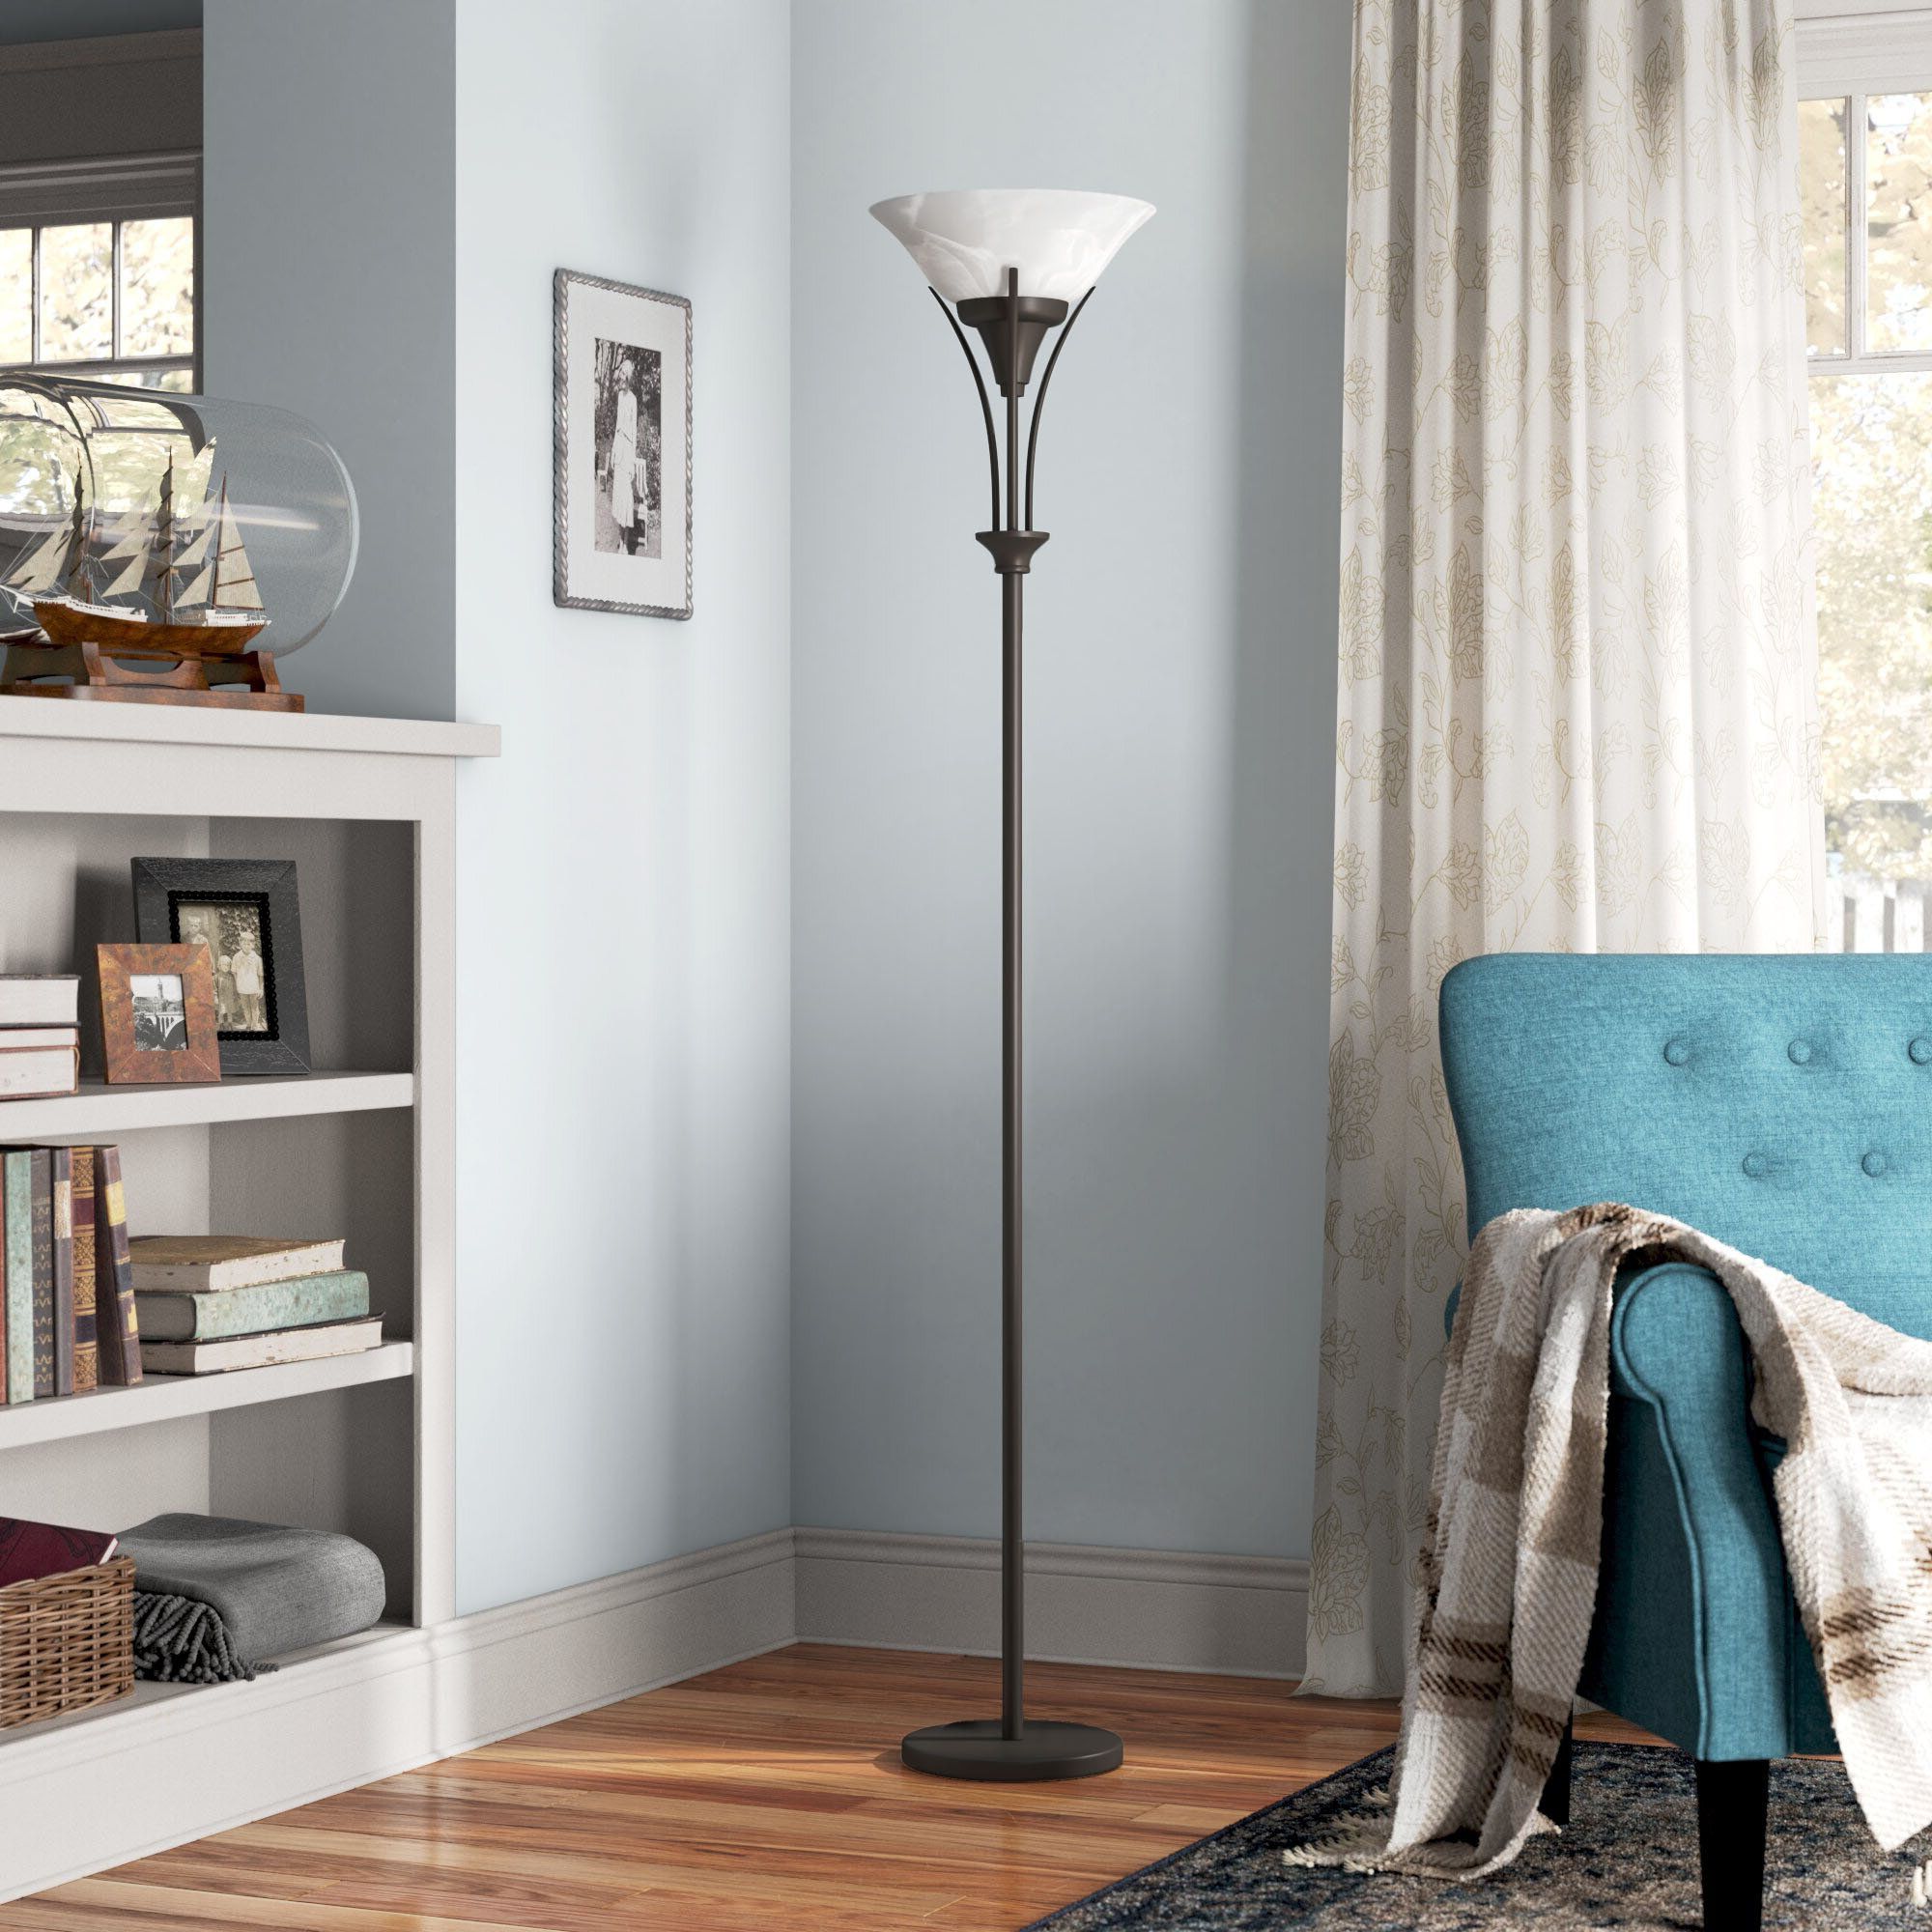 Wayfair | Extra Tall (70+ Inches) Floor Lamps Inside 74 Inch Floor Lamps (View 6 of 20)